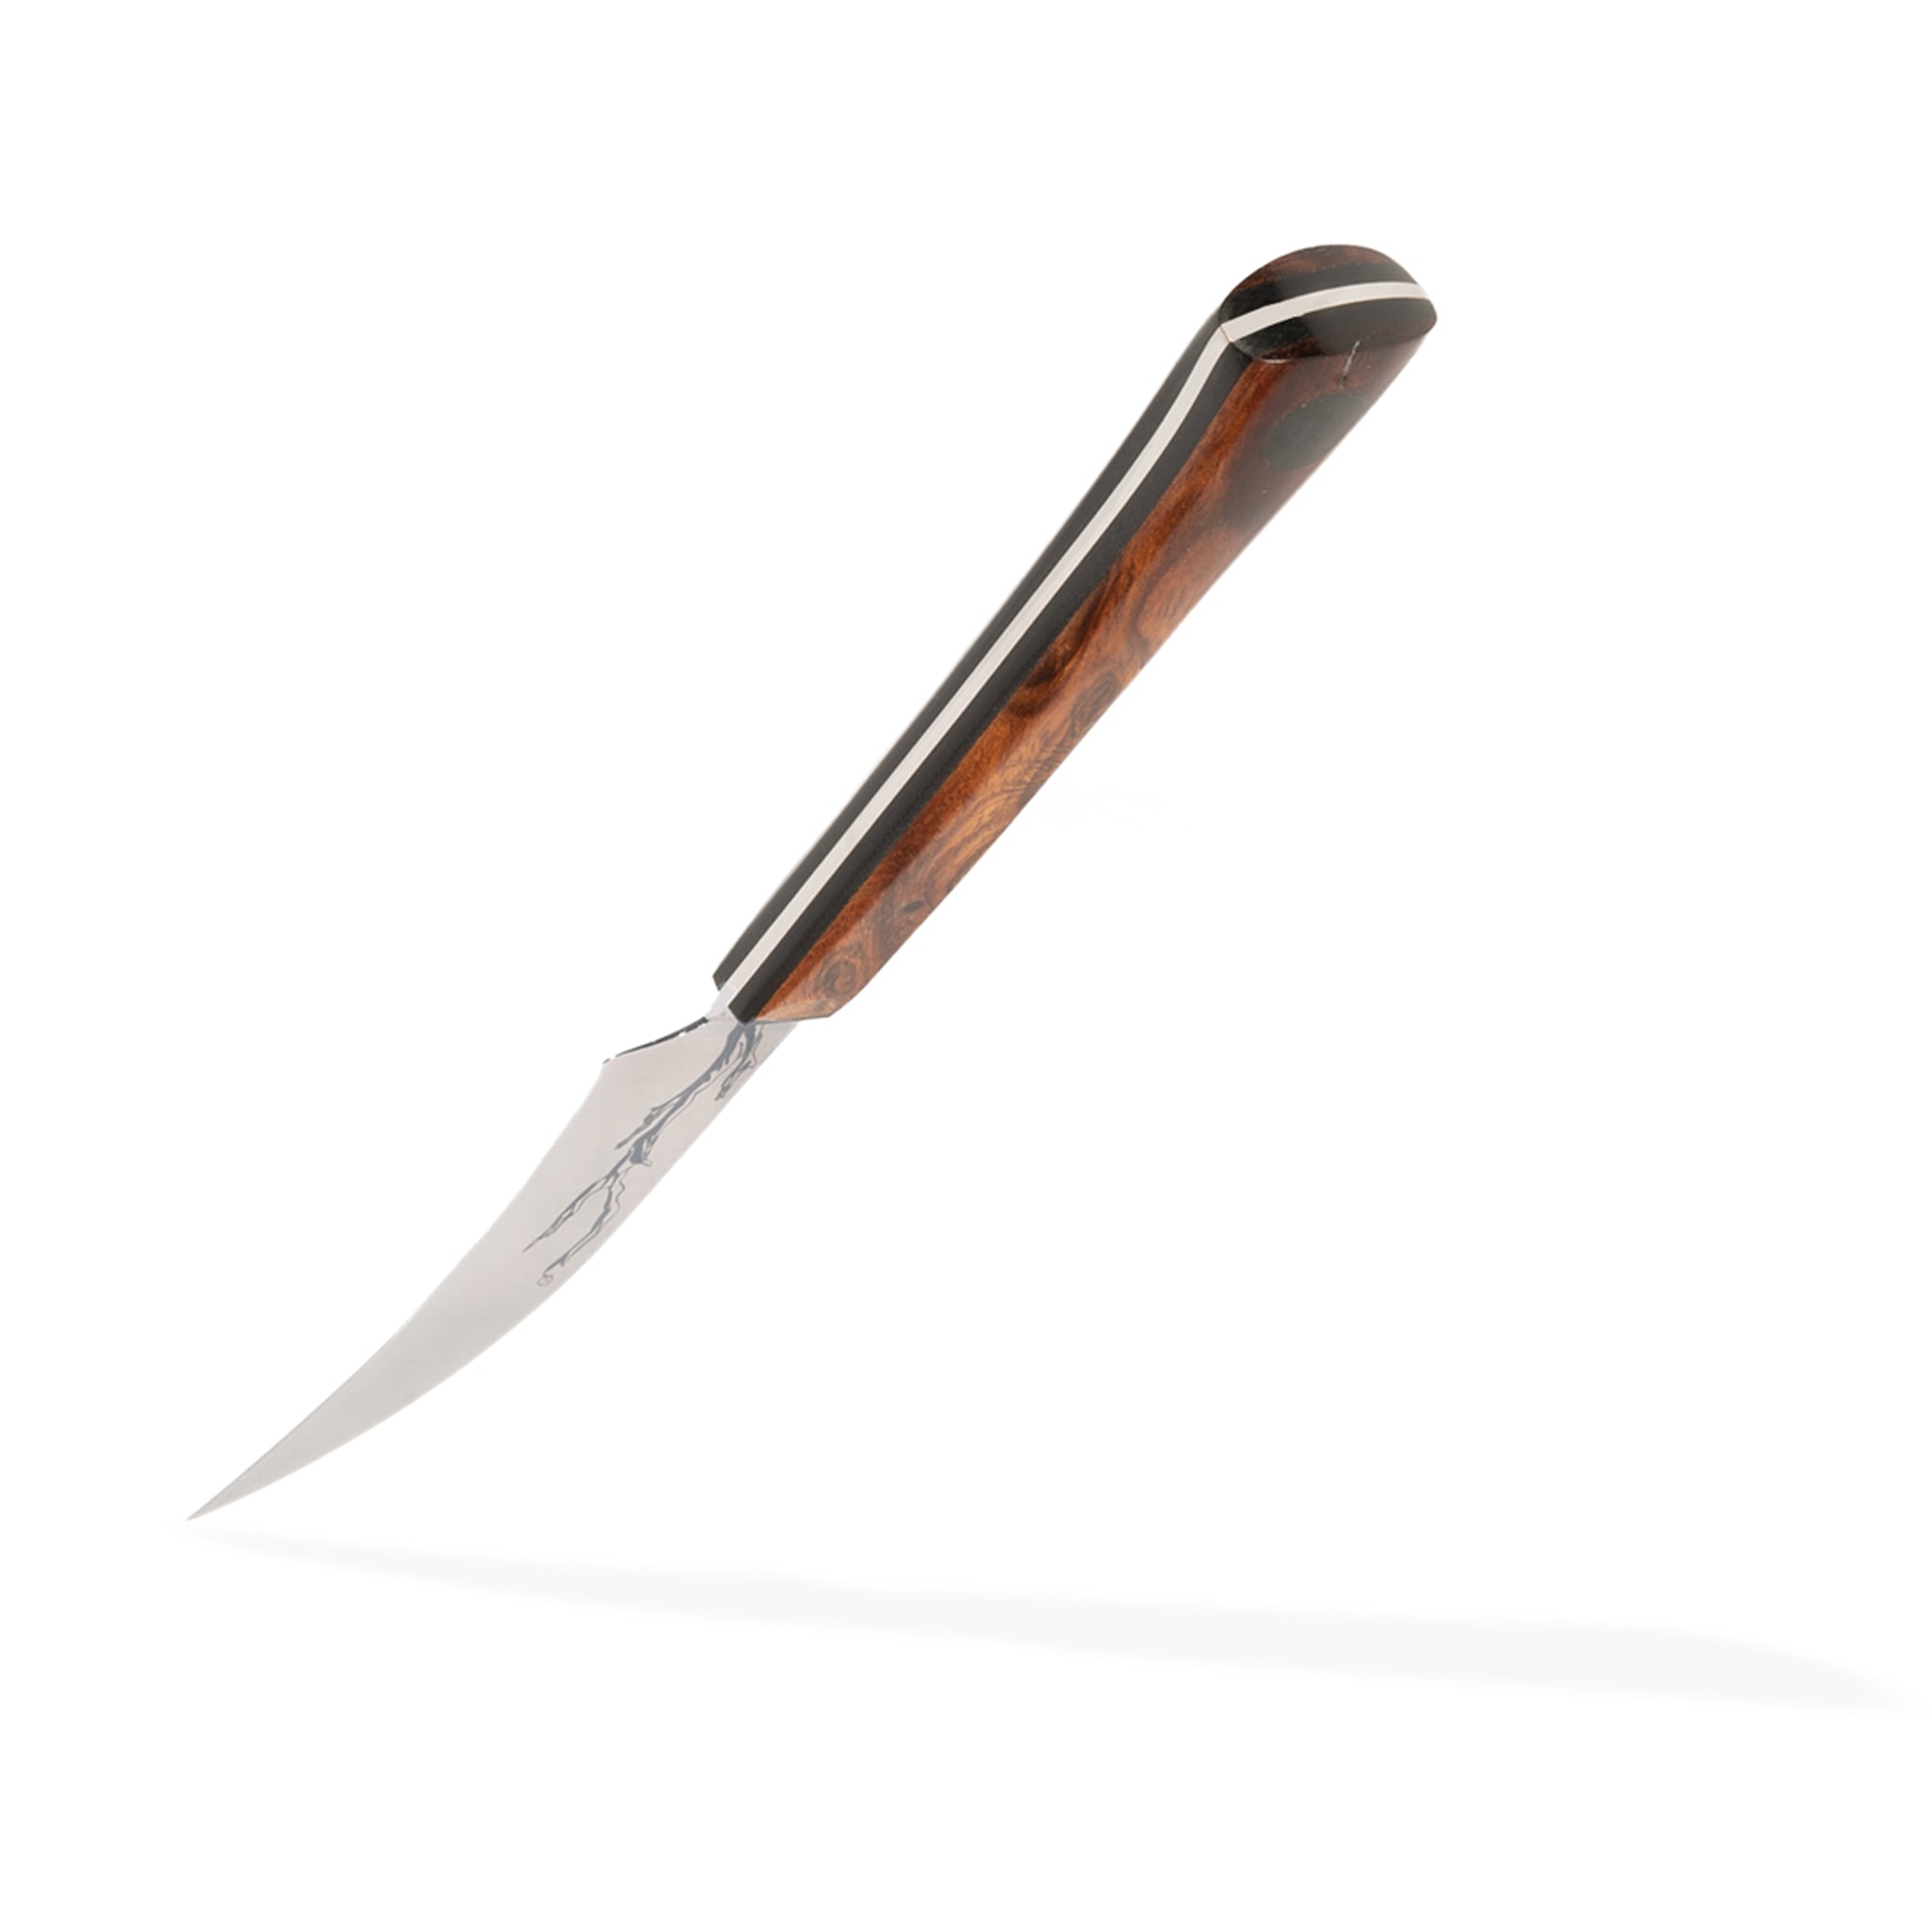 3" Bird's Beak knife featuring Olneya Desert Ironwood handle. The curved blade in perfect for in-hand work such as cleaning, peeling, paring, and tourné and decorative cuts.